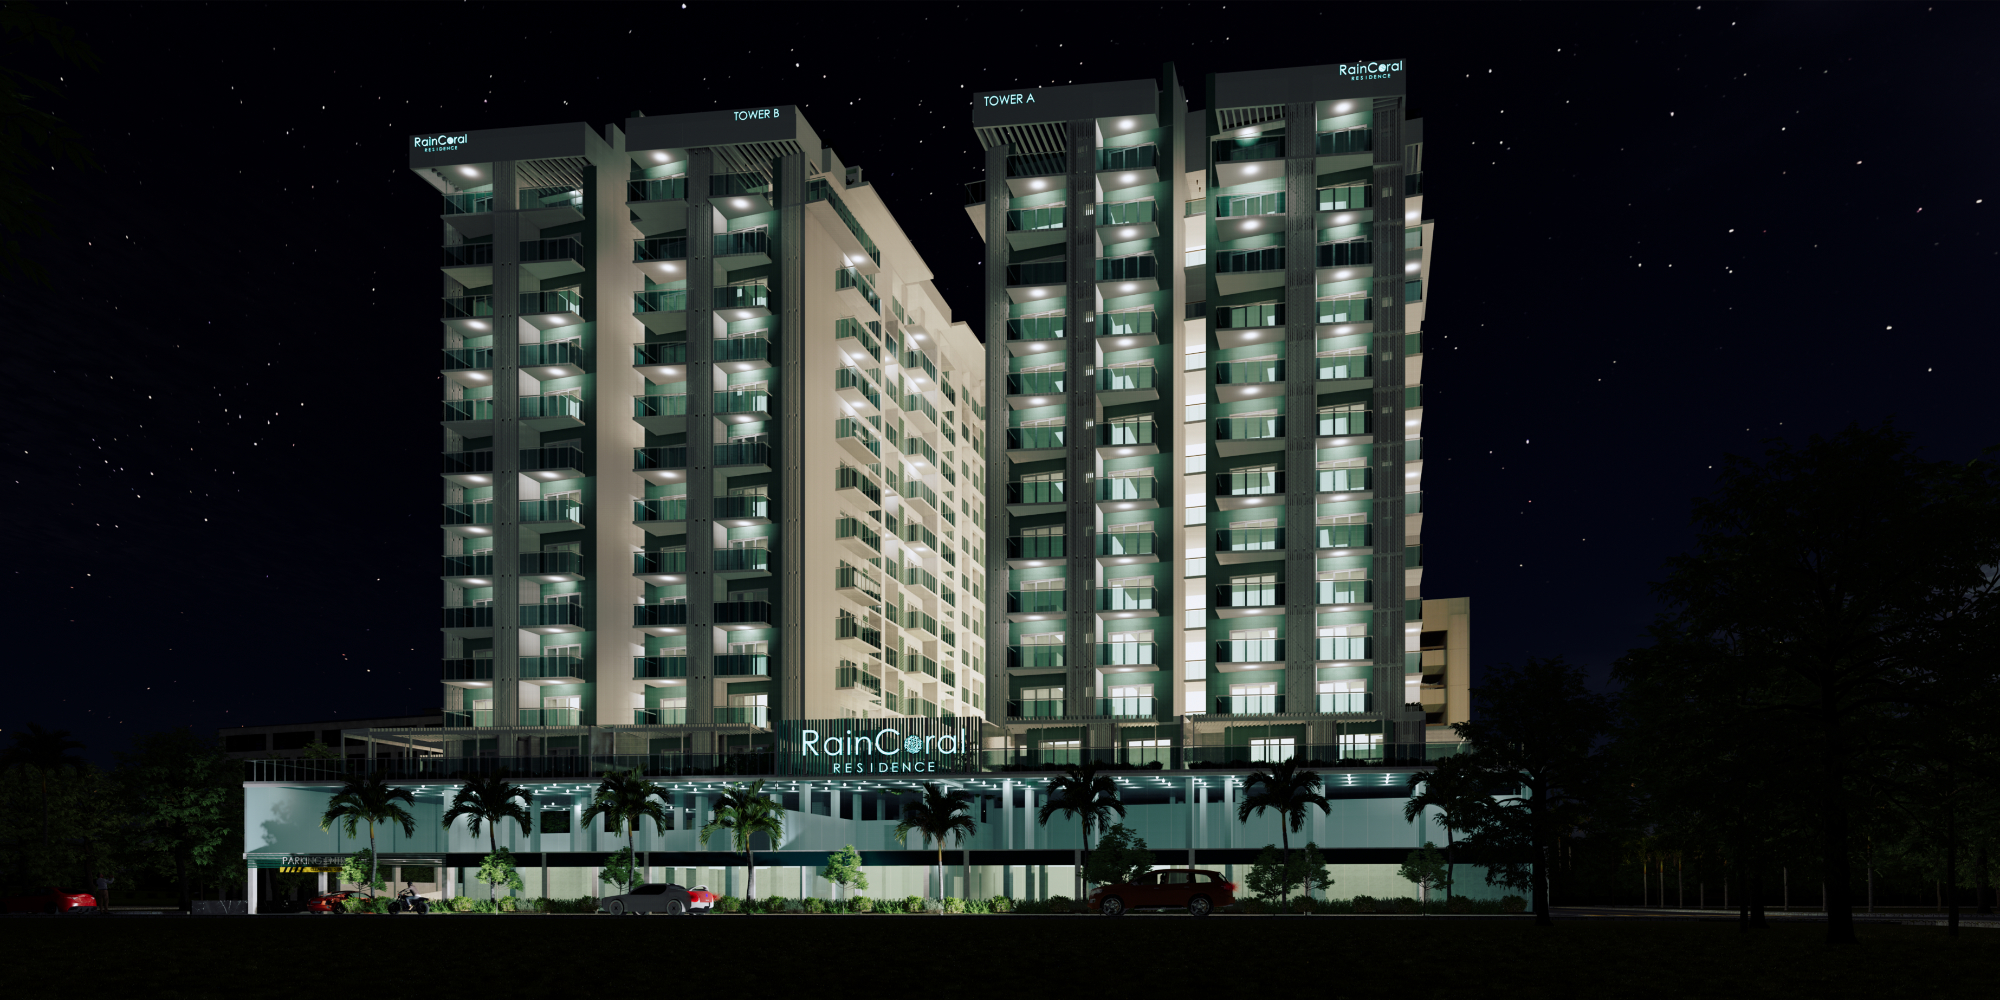 3D Render of RainCoral Residence, a condominium apartment complex developed by Rainbow Mega Developers.